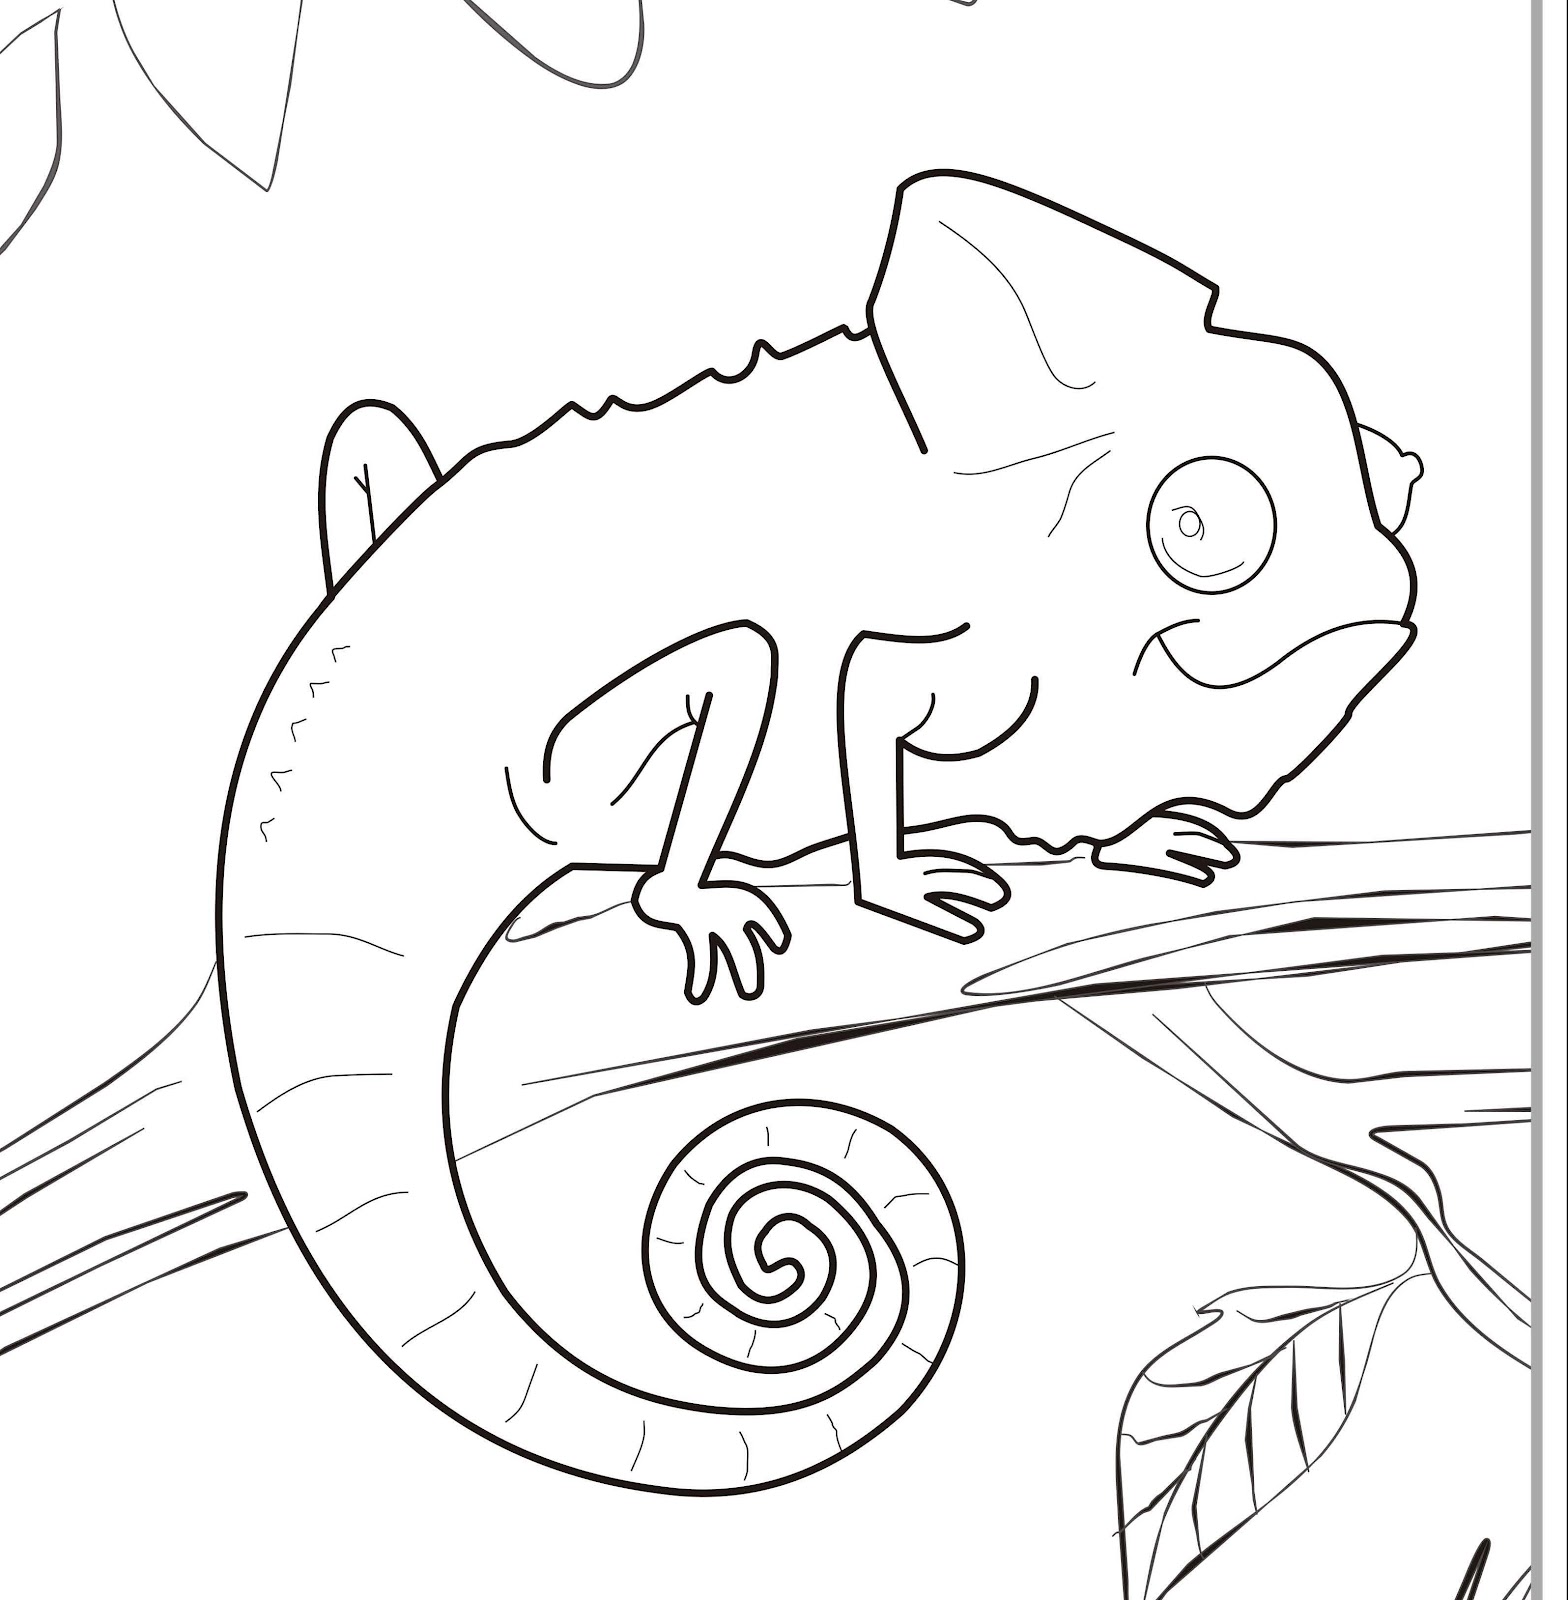 mixed up chameleon coloring page  coloring home